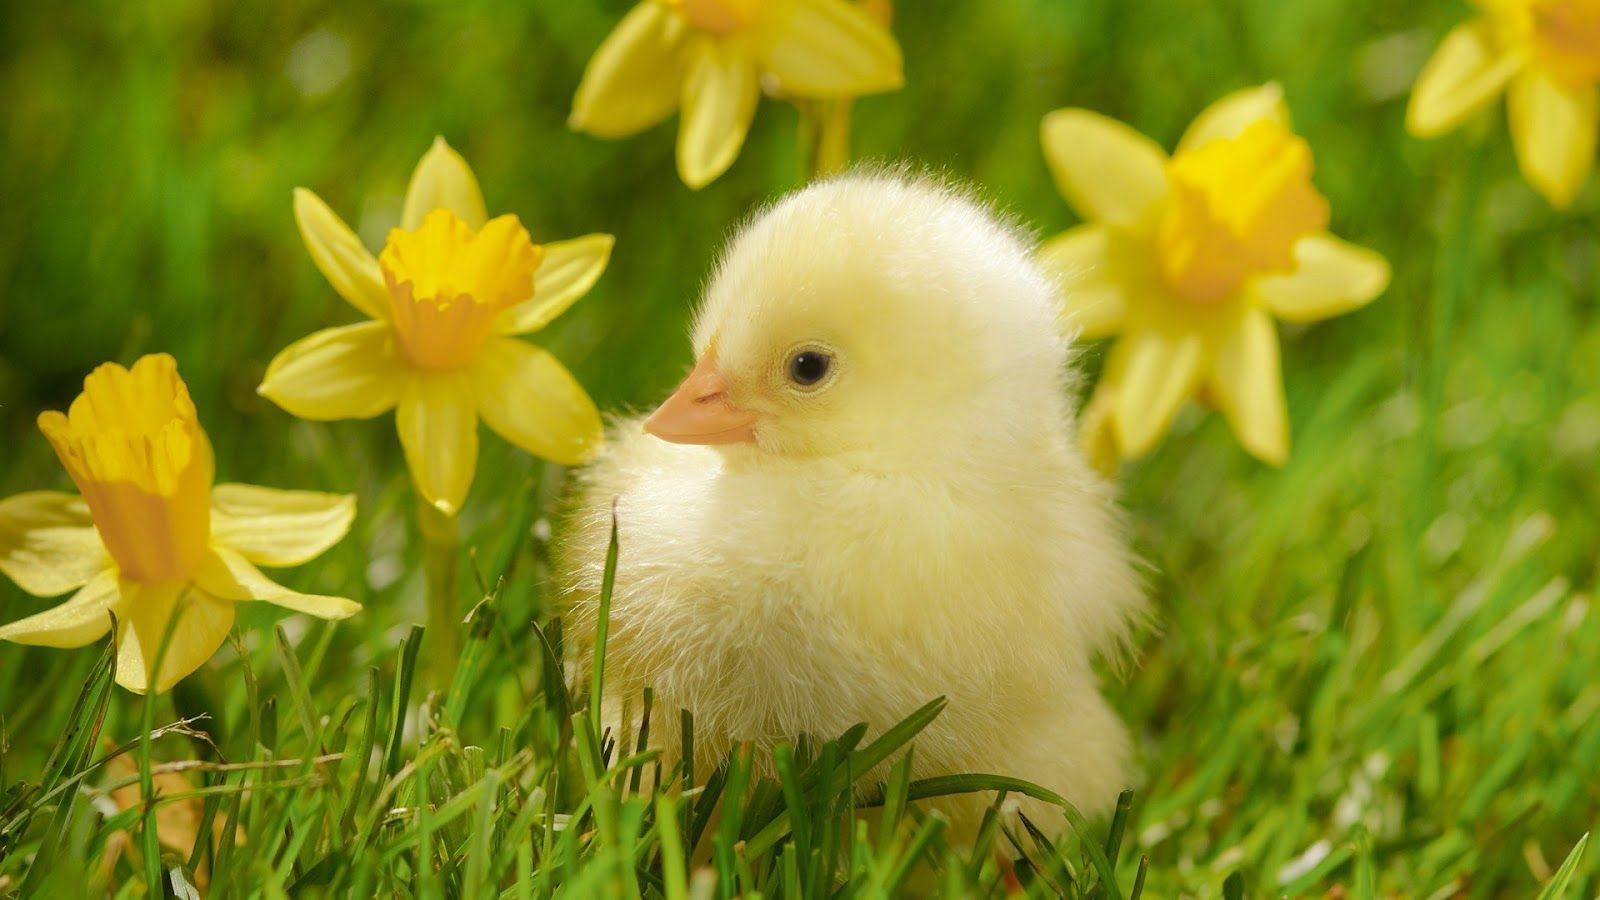 Welcome Spring ” The King of Seasons “. Cute baby animals, Animals, Baby chicks